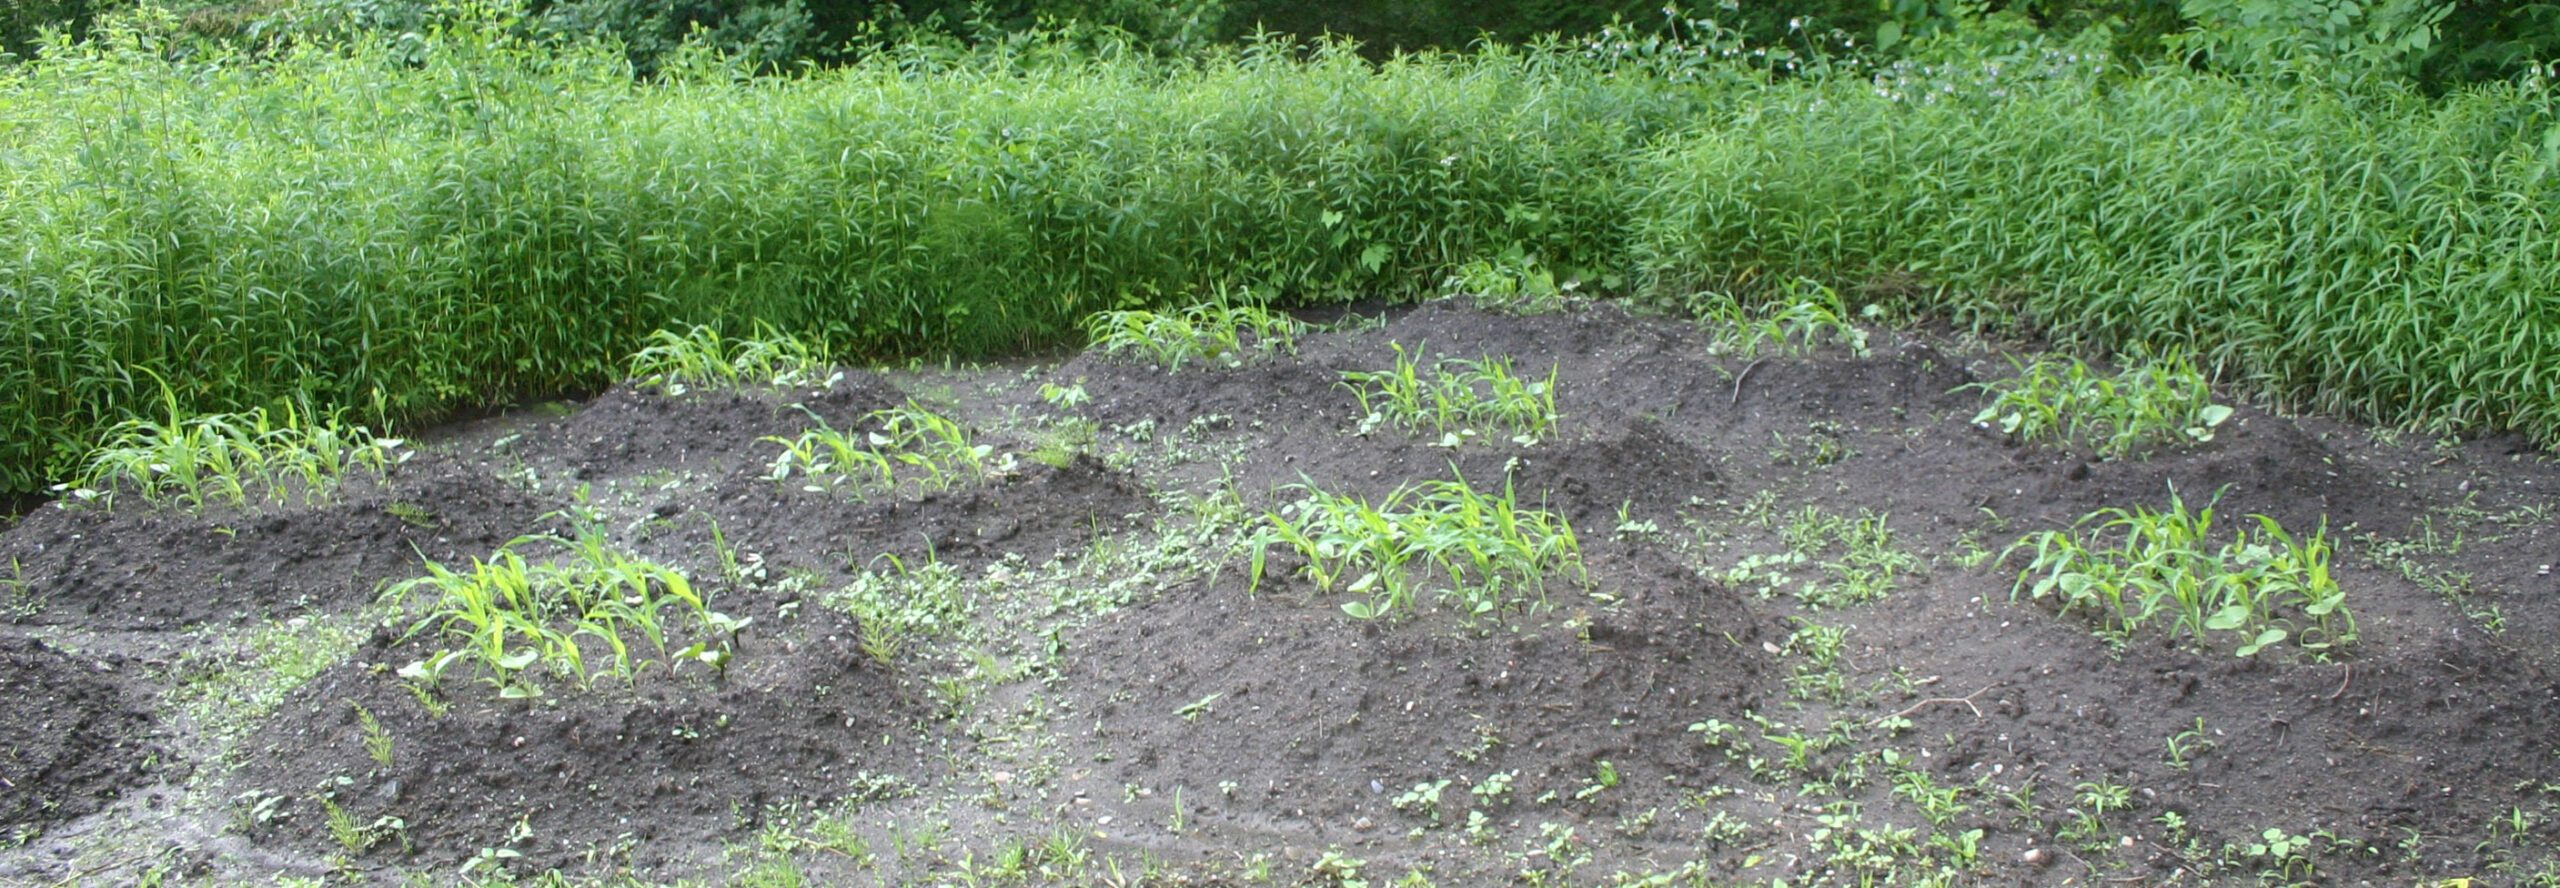 Cleared spot of land in front of higher growing plants. Small mounds of dirt have been built up with plants growing from the top.